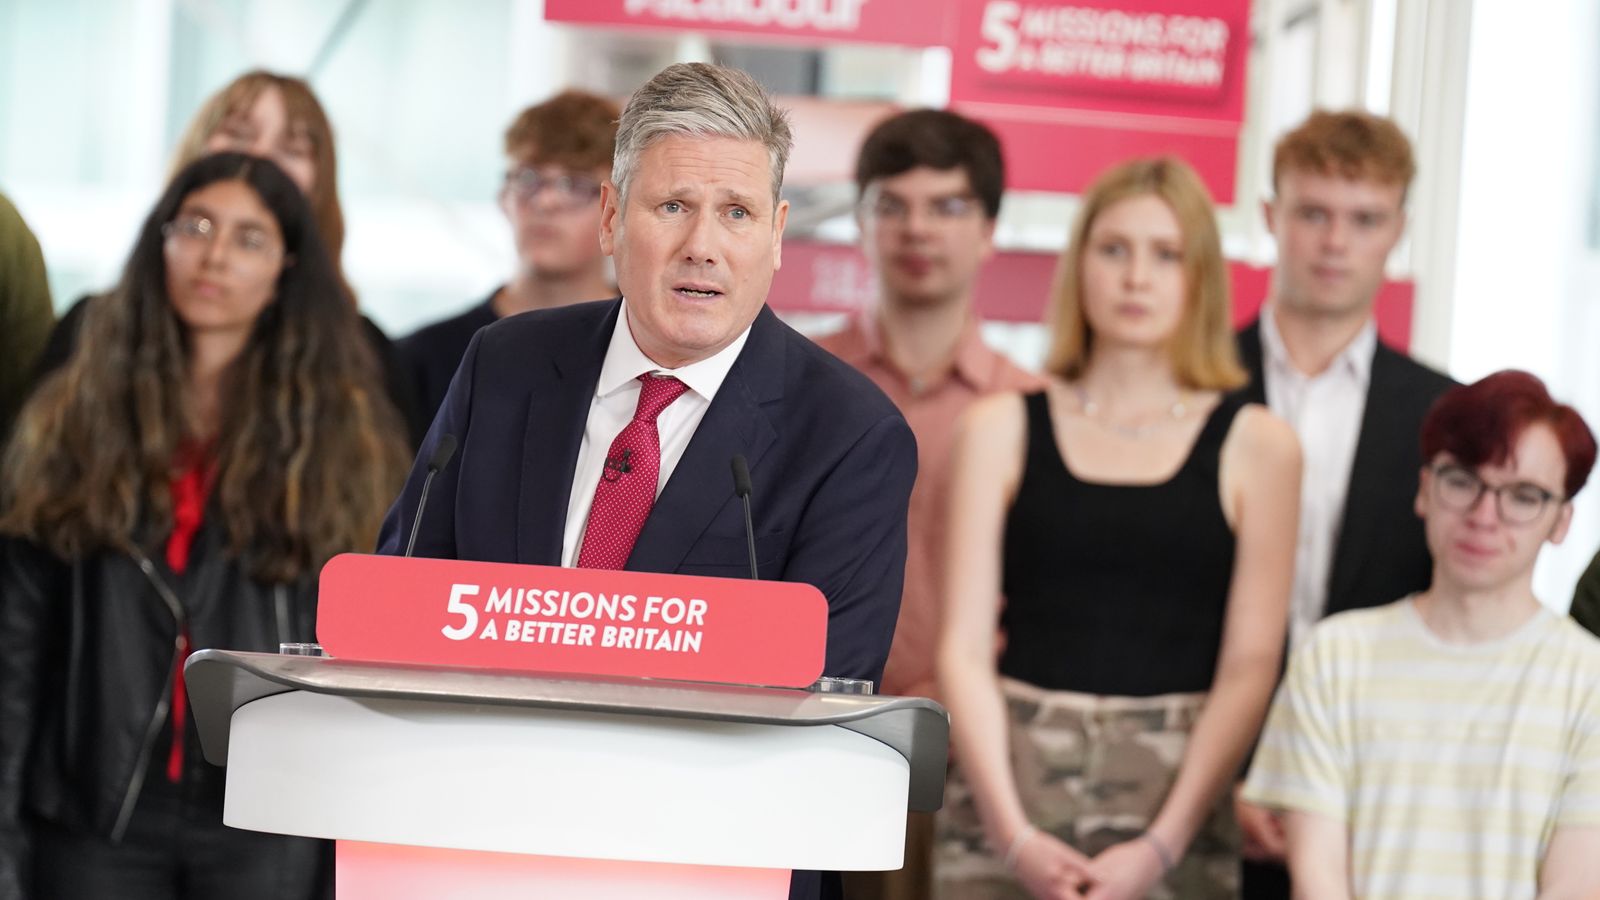 With his pledge to reform education, Sir Keir has embarked on his most personal - and political - ambition yet